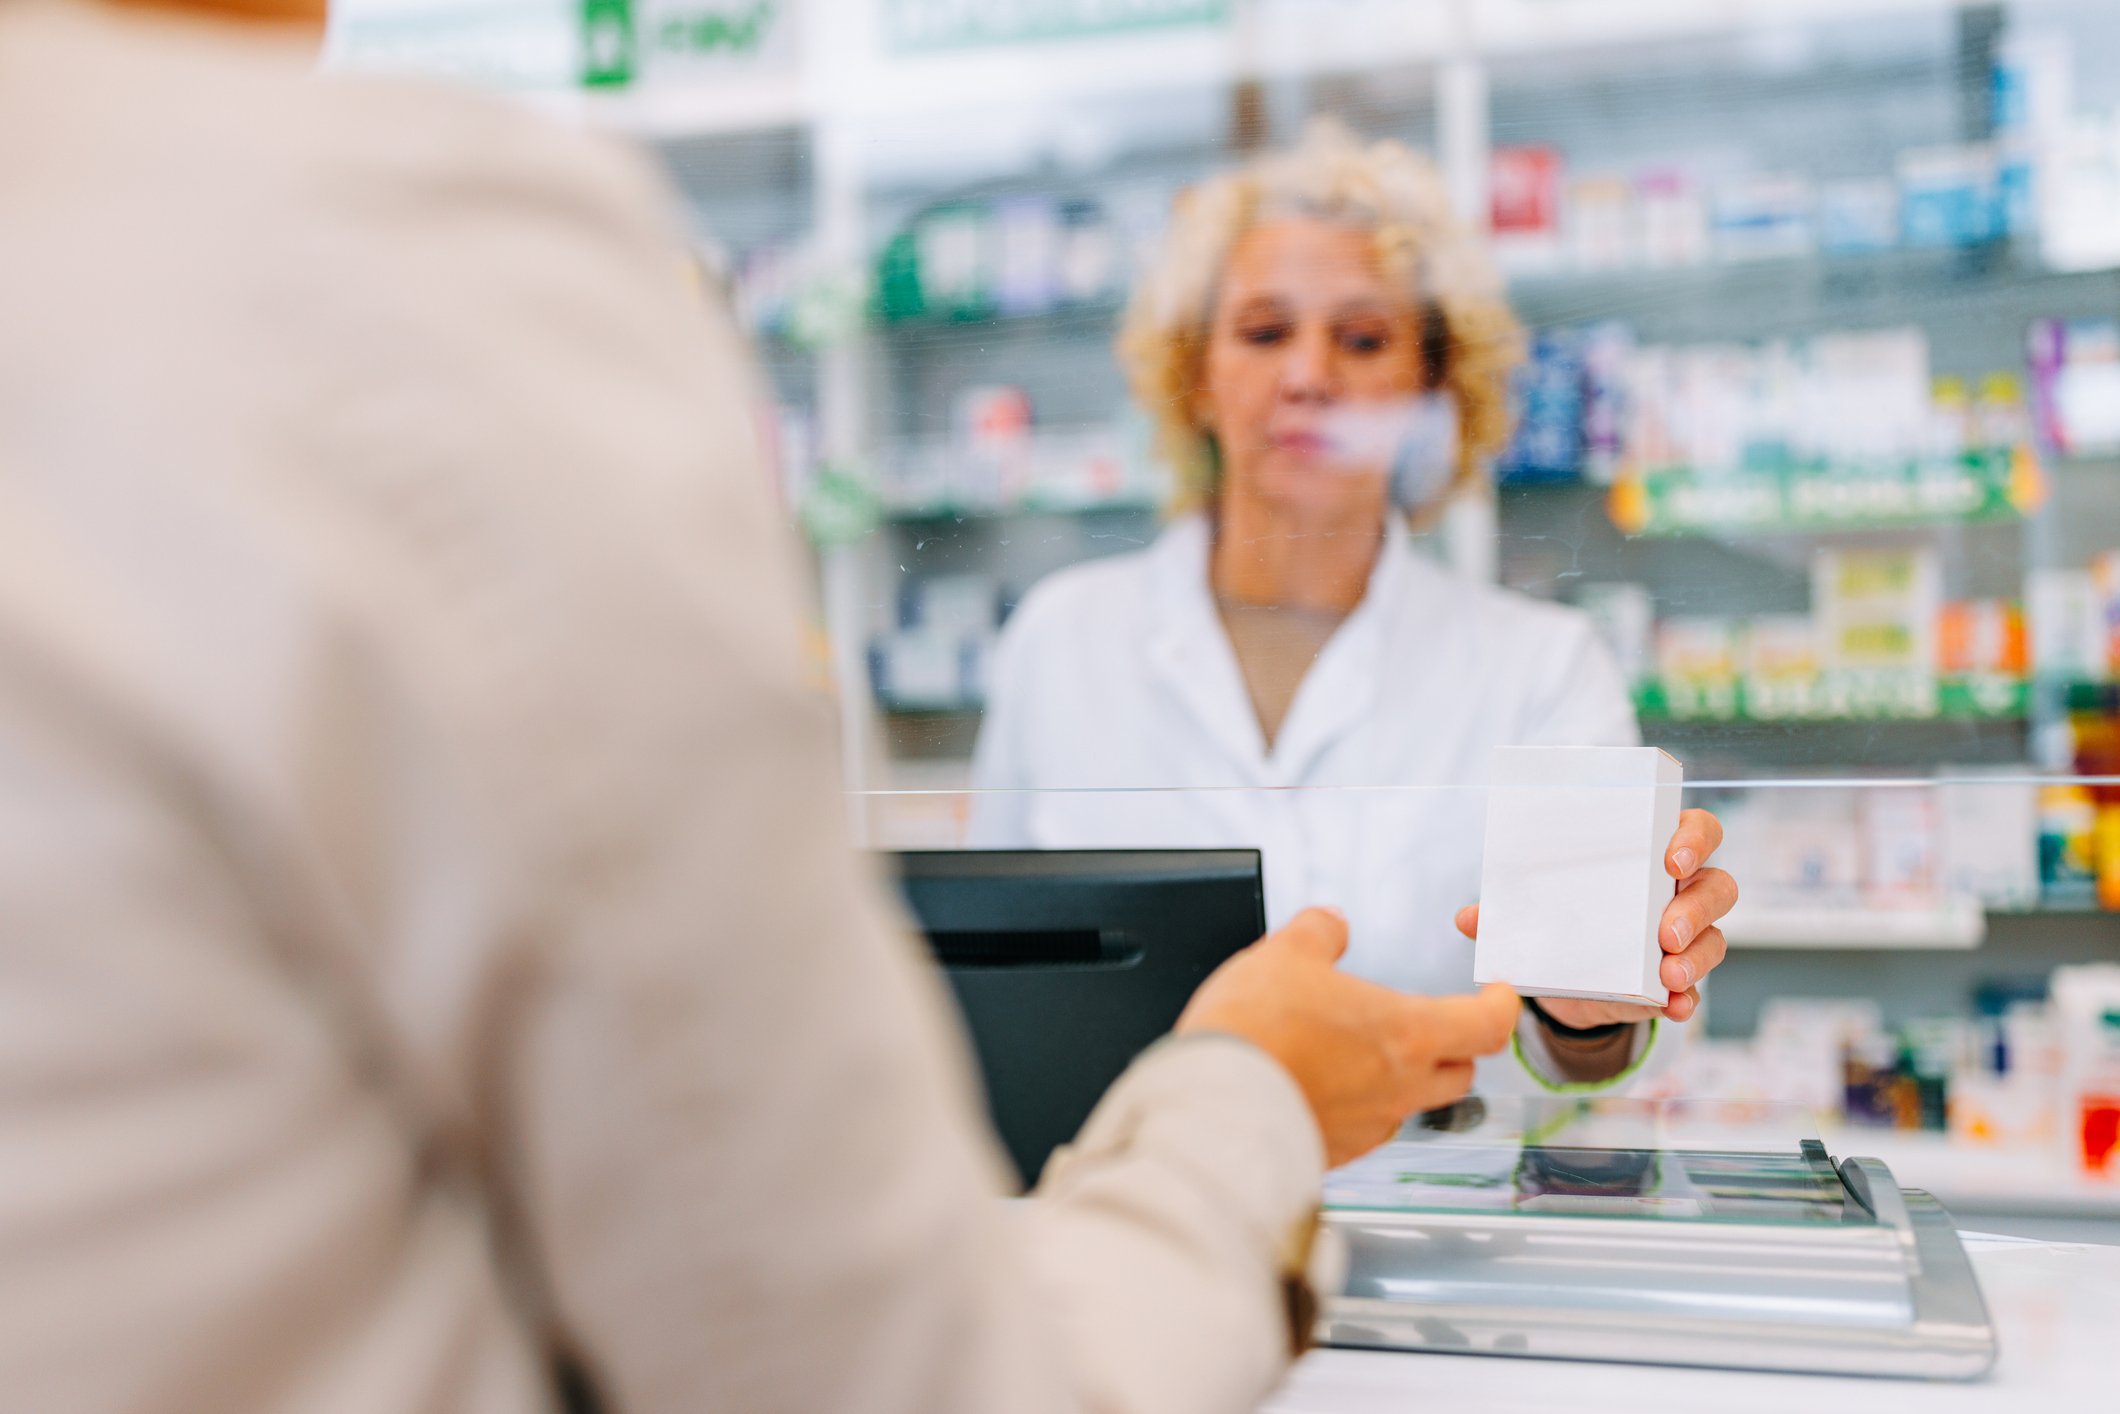 patient picking up medication at pharmacy counter 